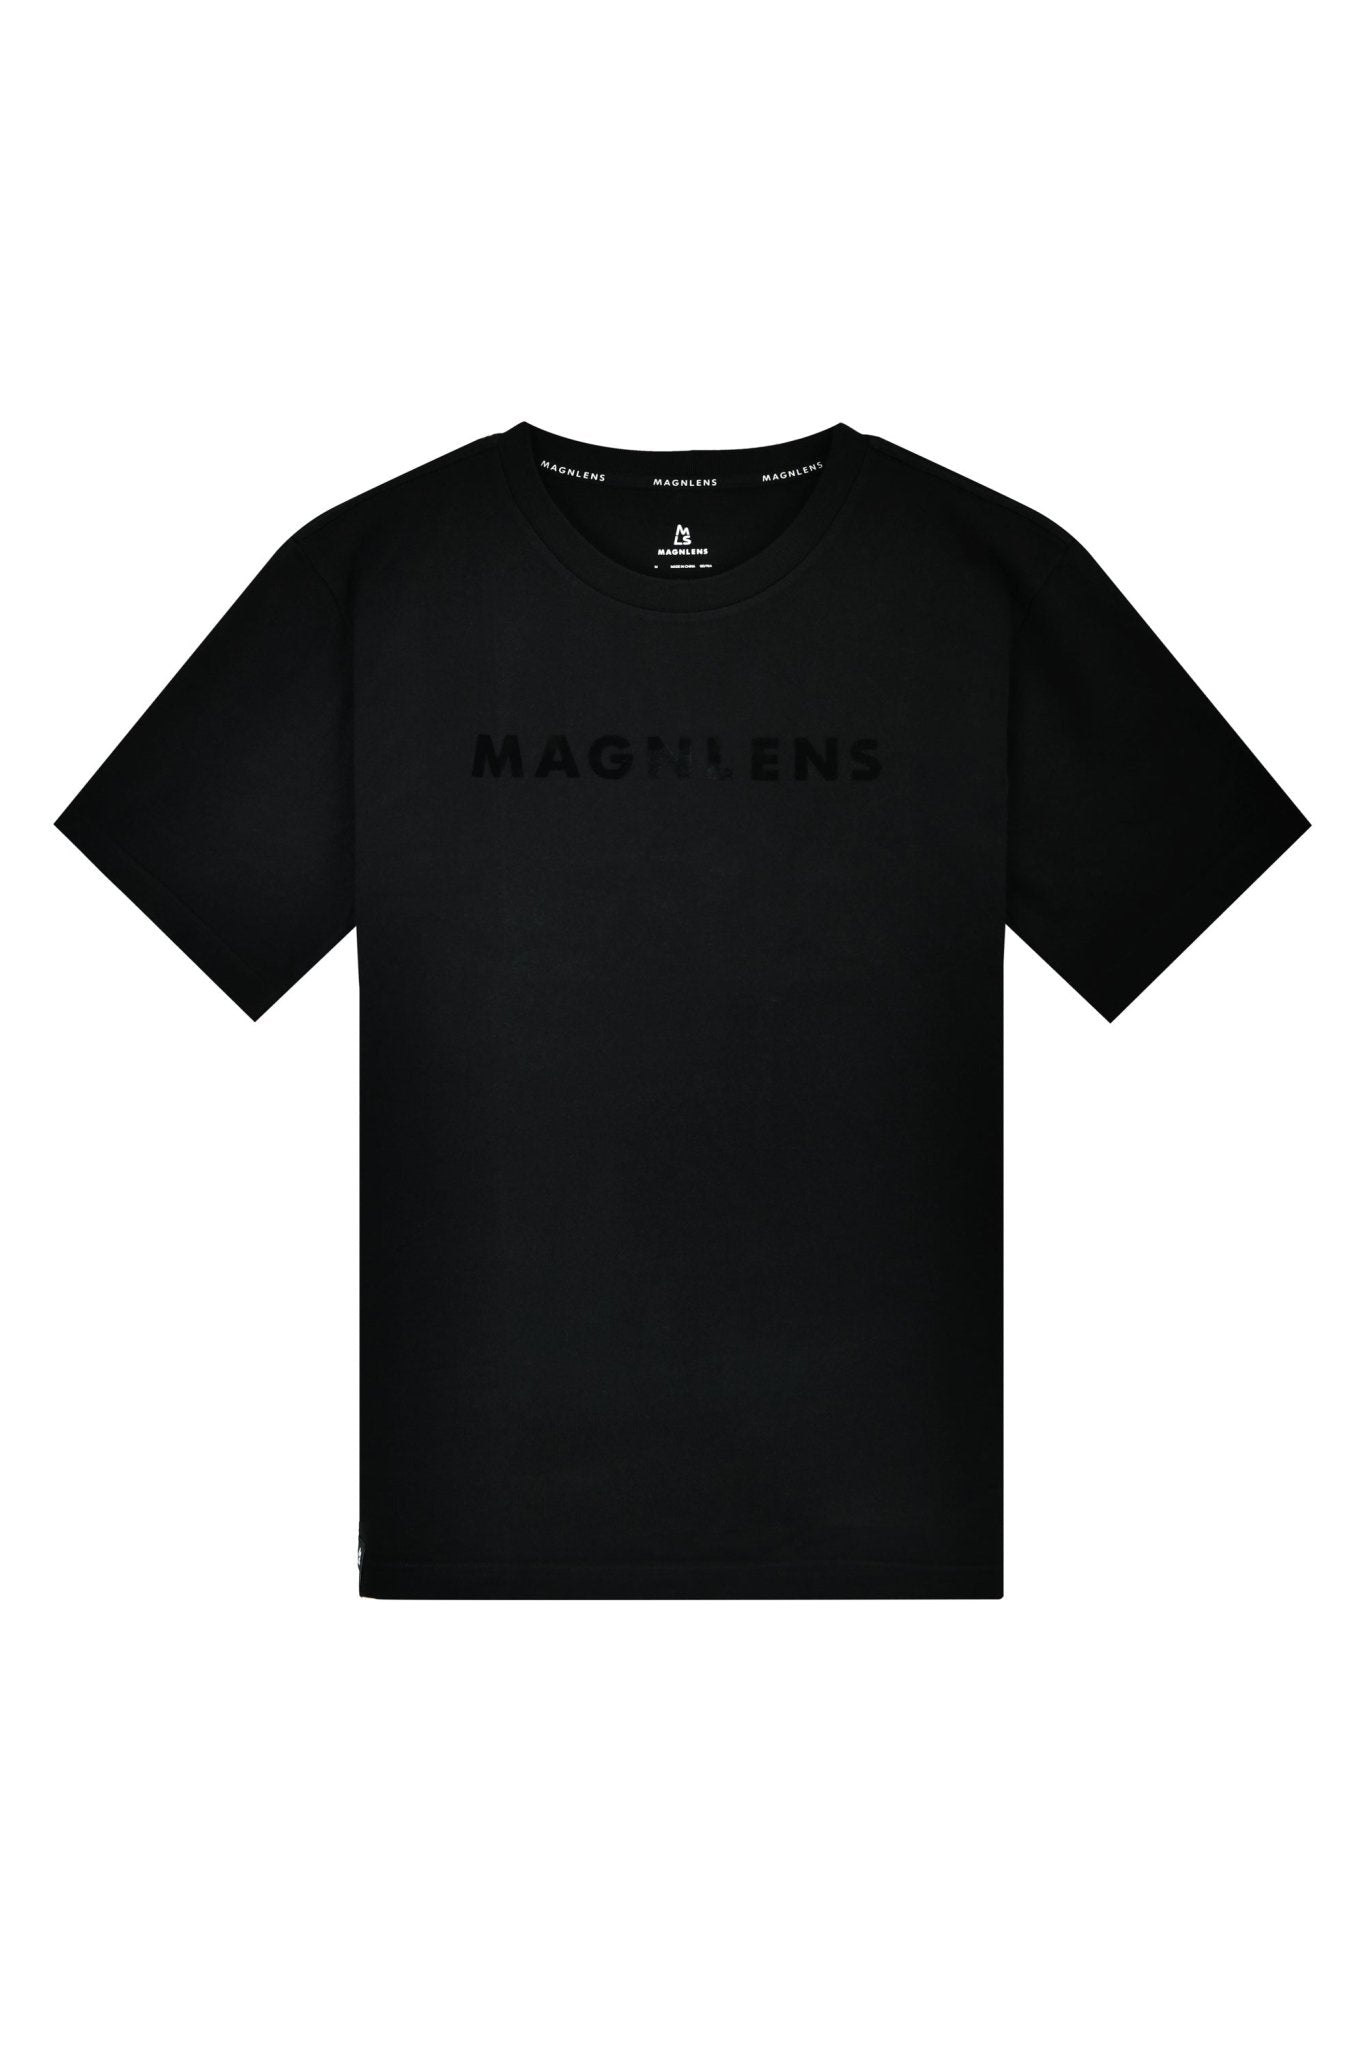 Graphic Regular Fit Tee - Magnlens